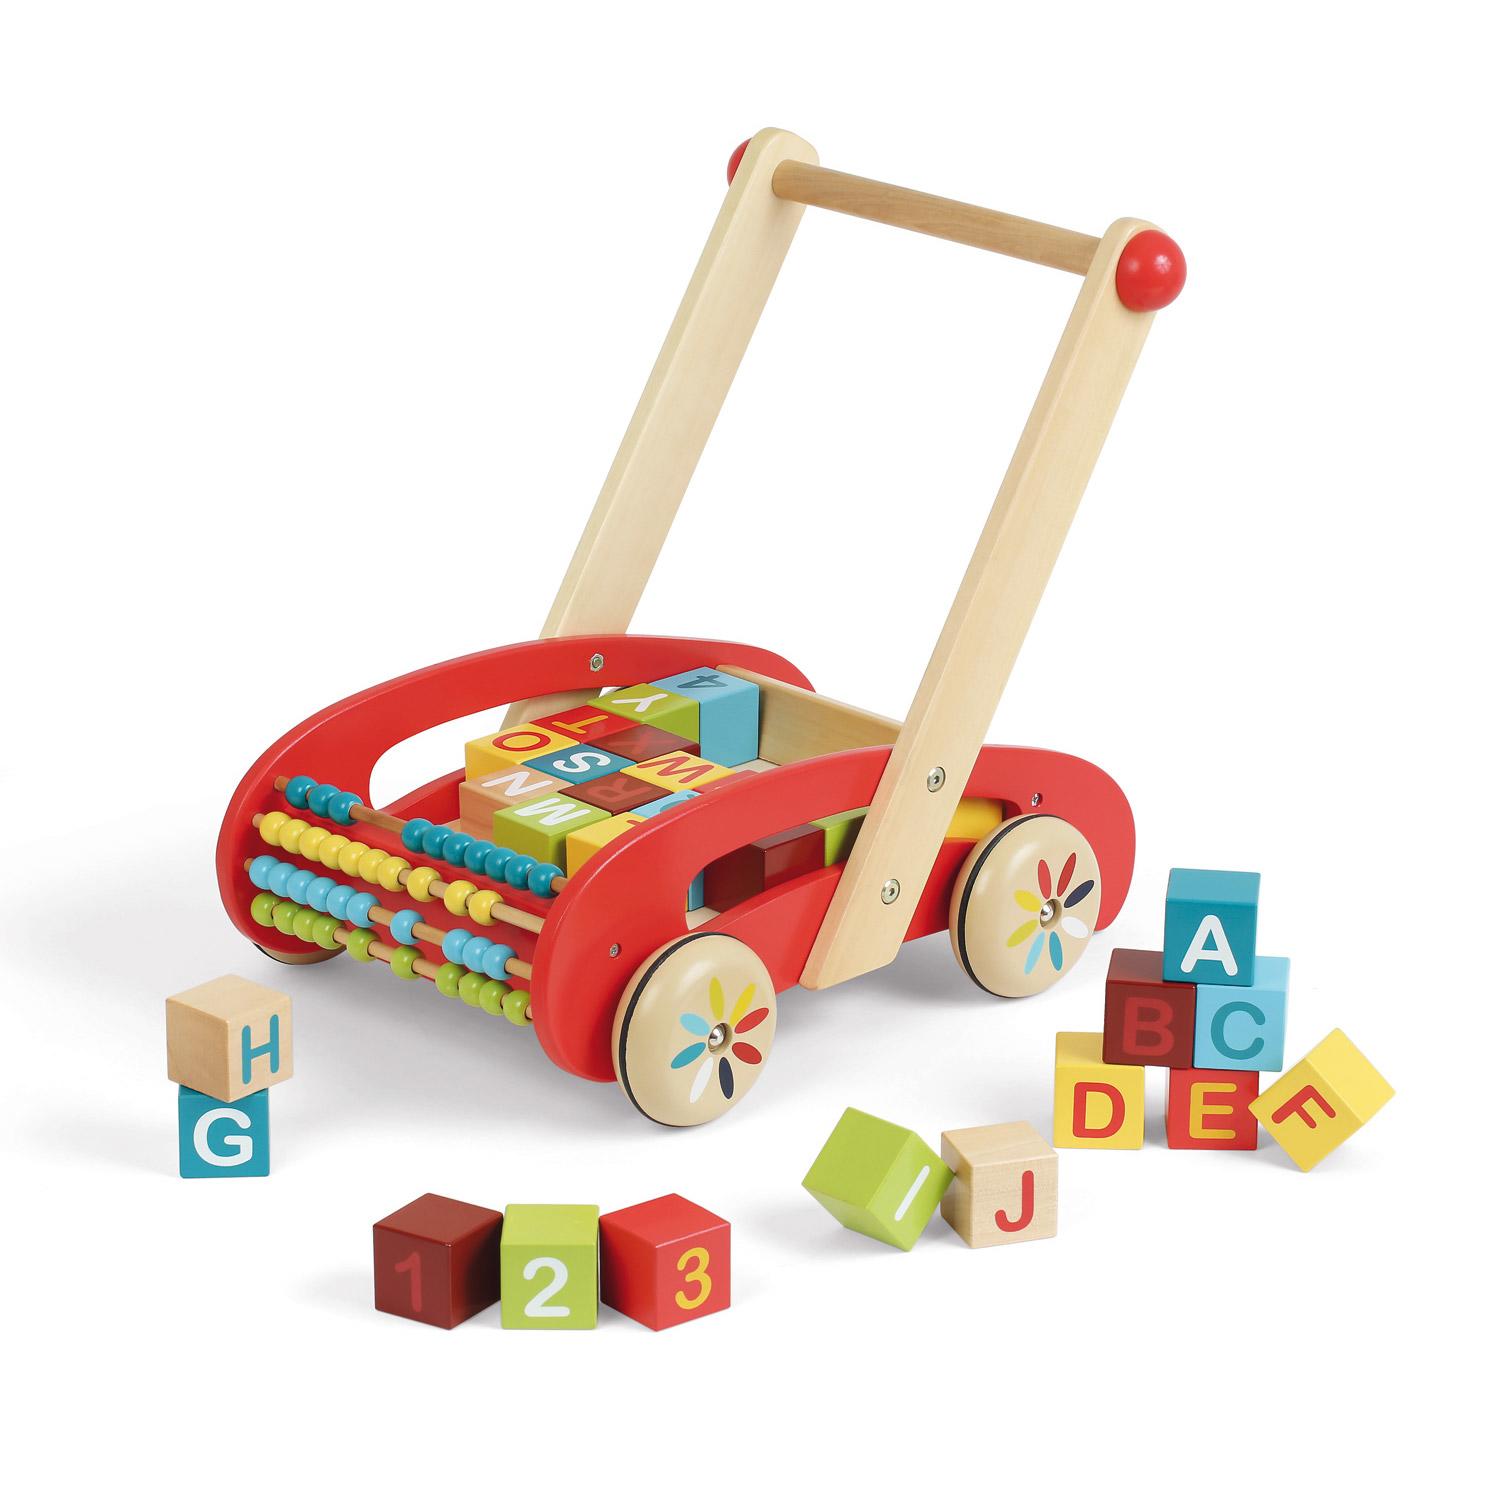 Red wooden baby walker with colourful building blocks with letters and number round about it.